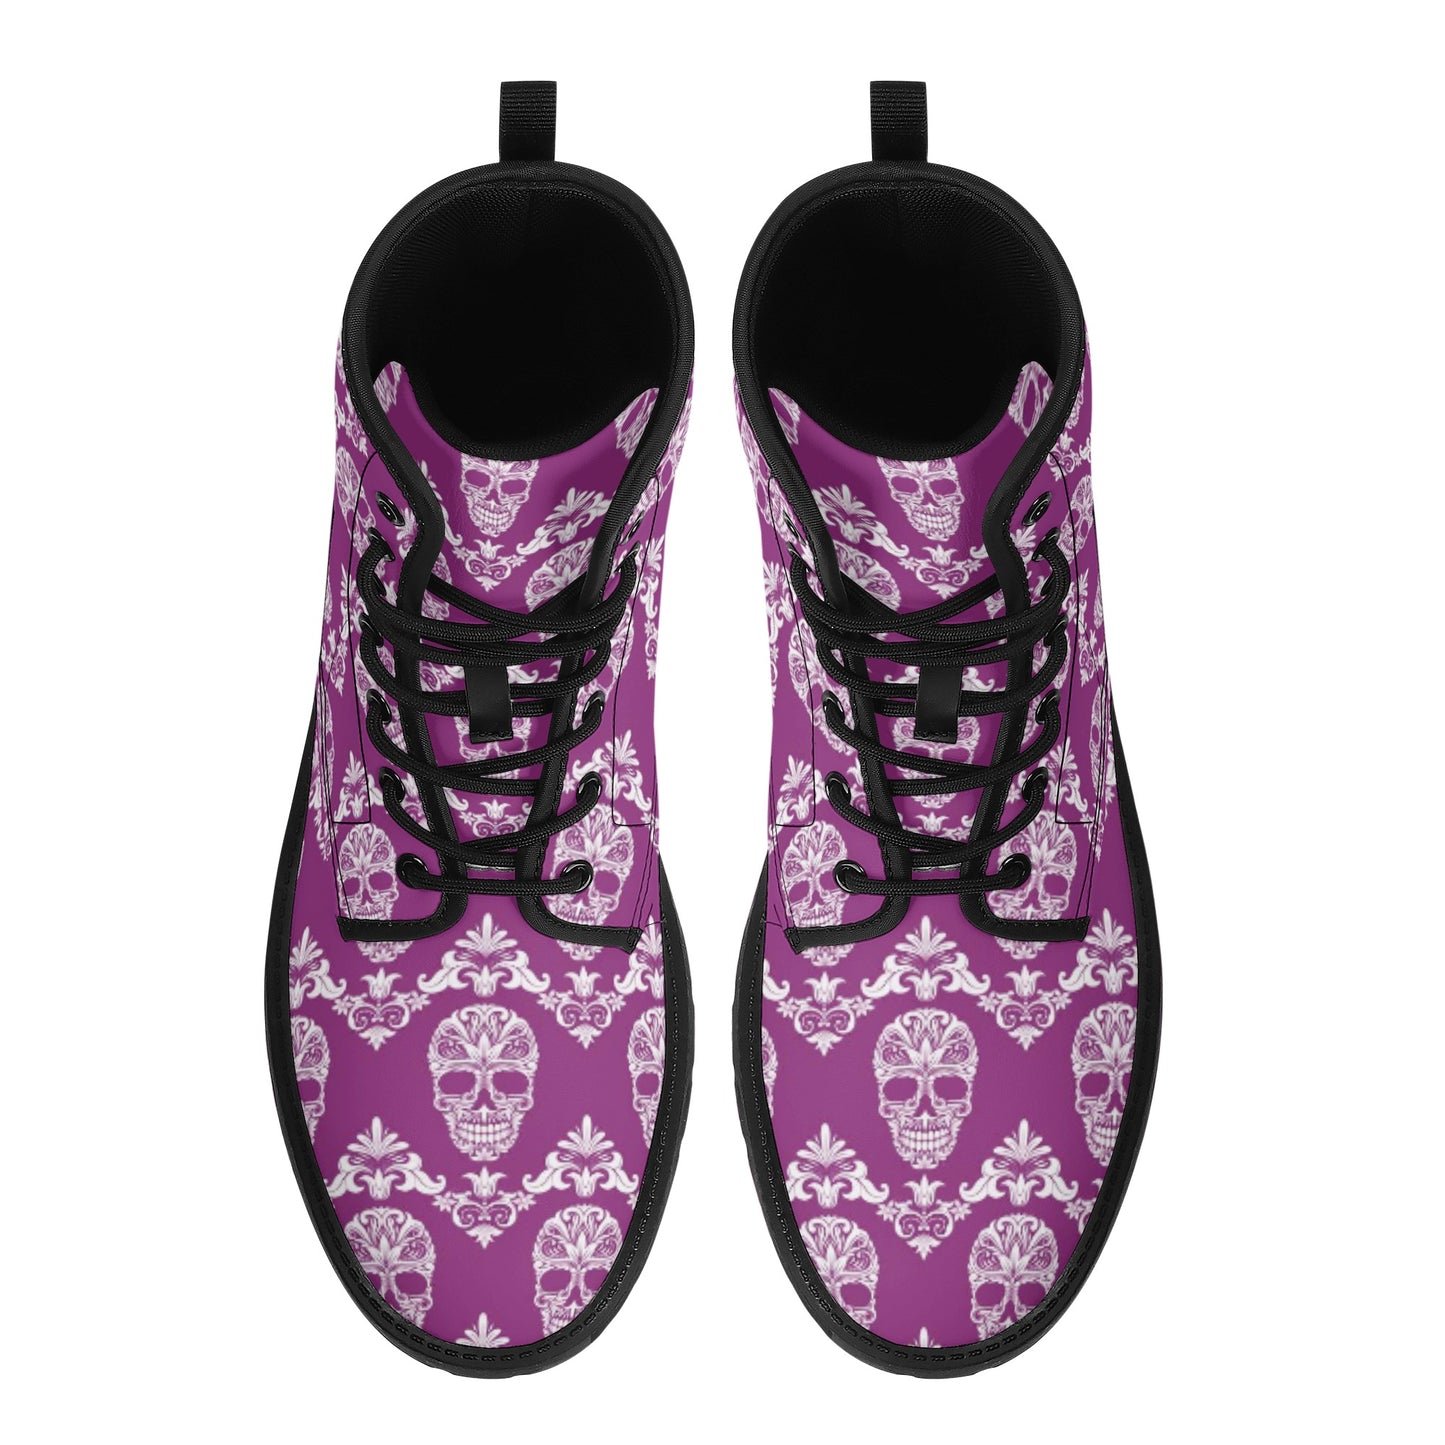 Day of the dead candy skull calaveras Men's Leather Boots